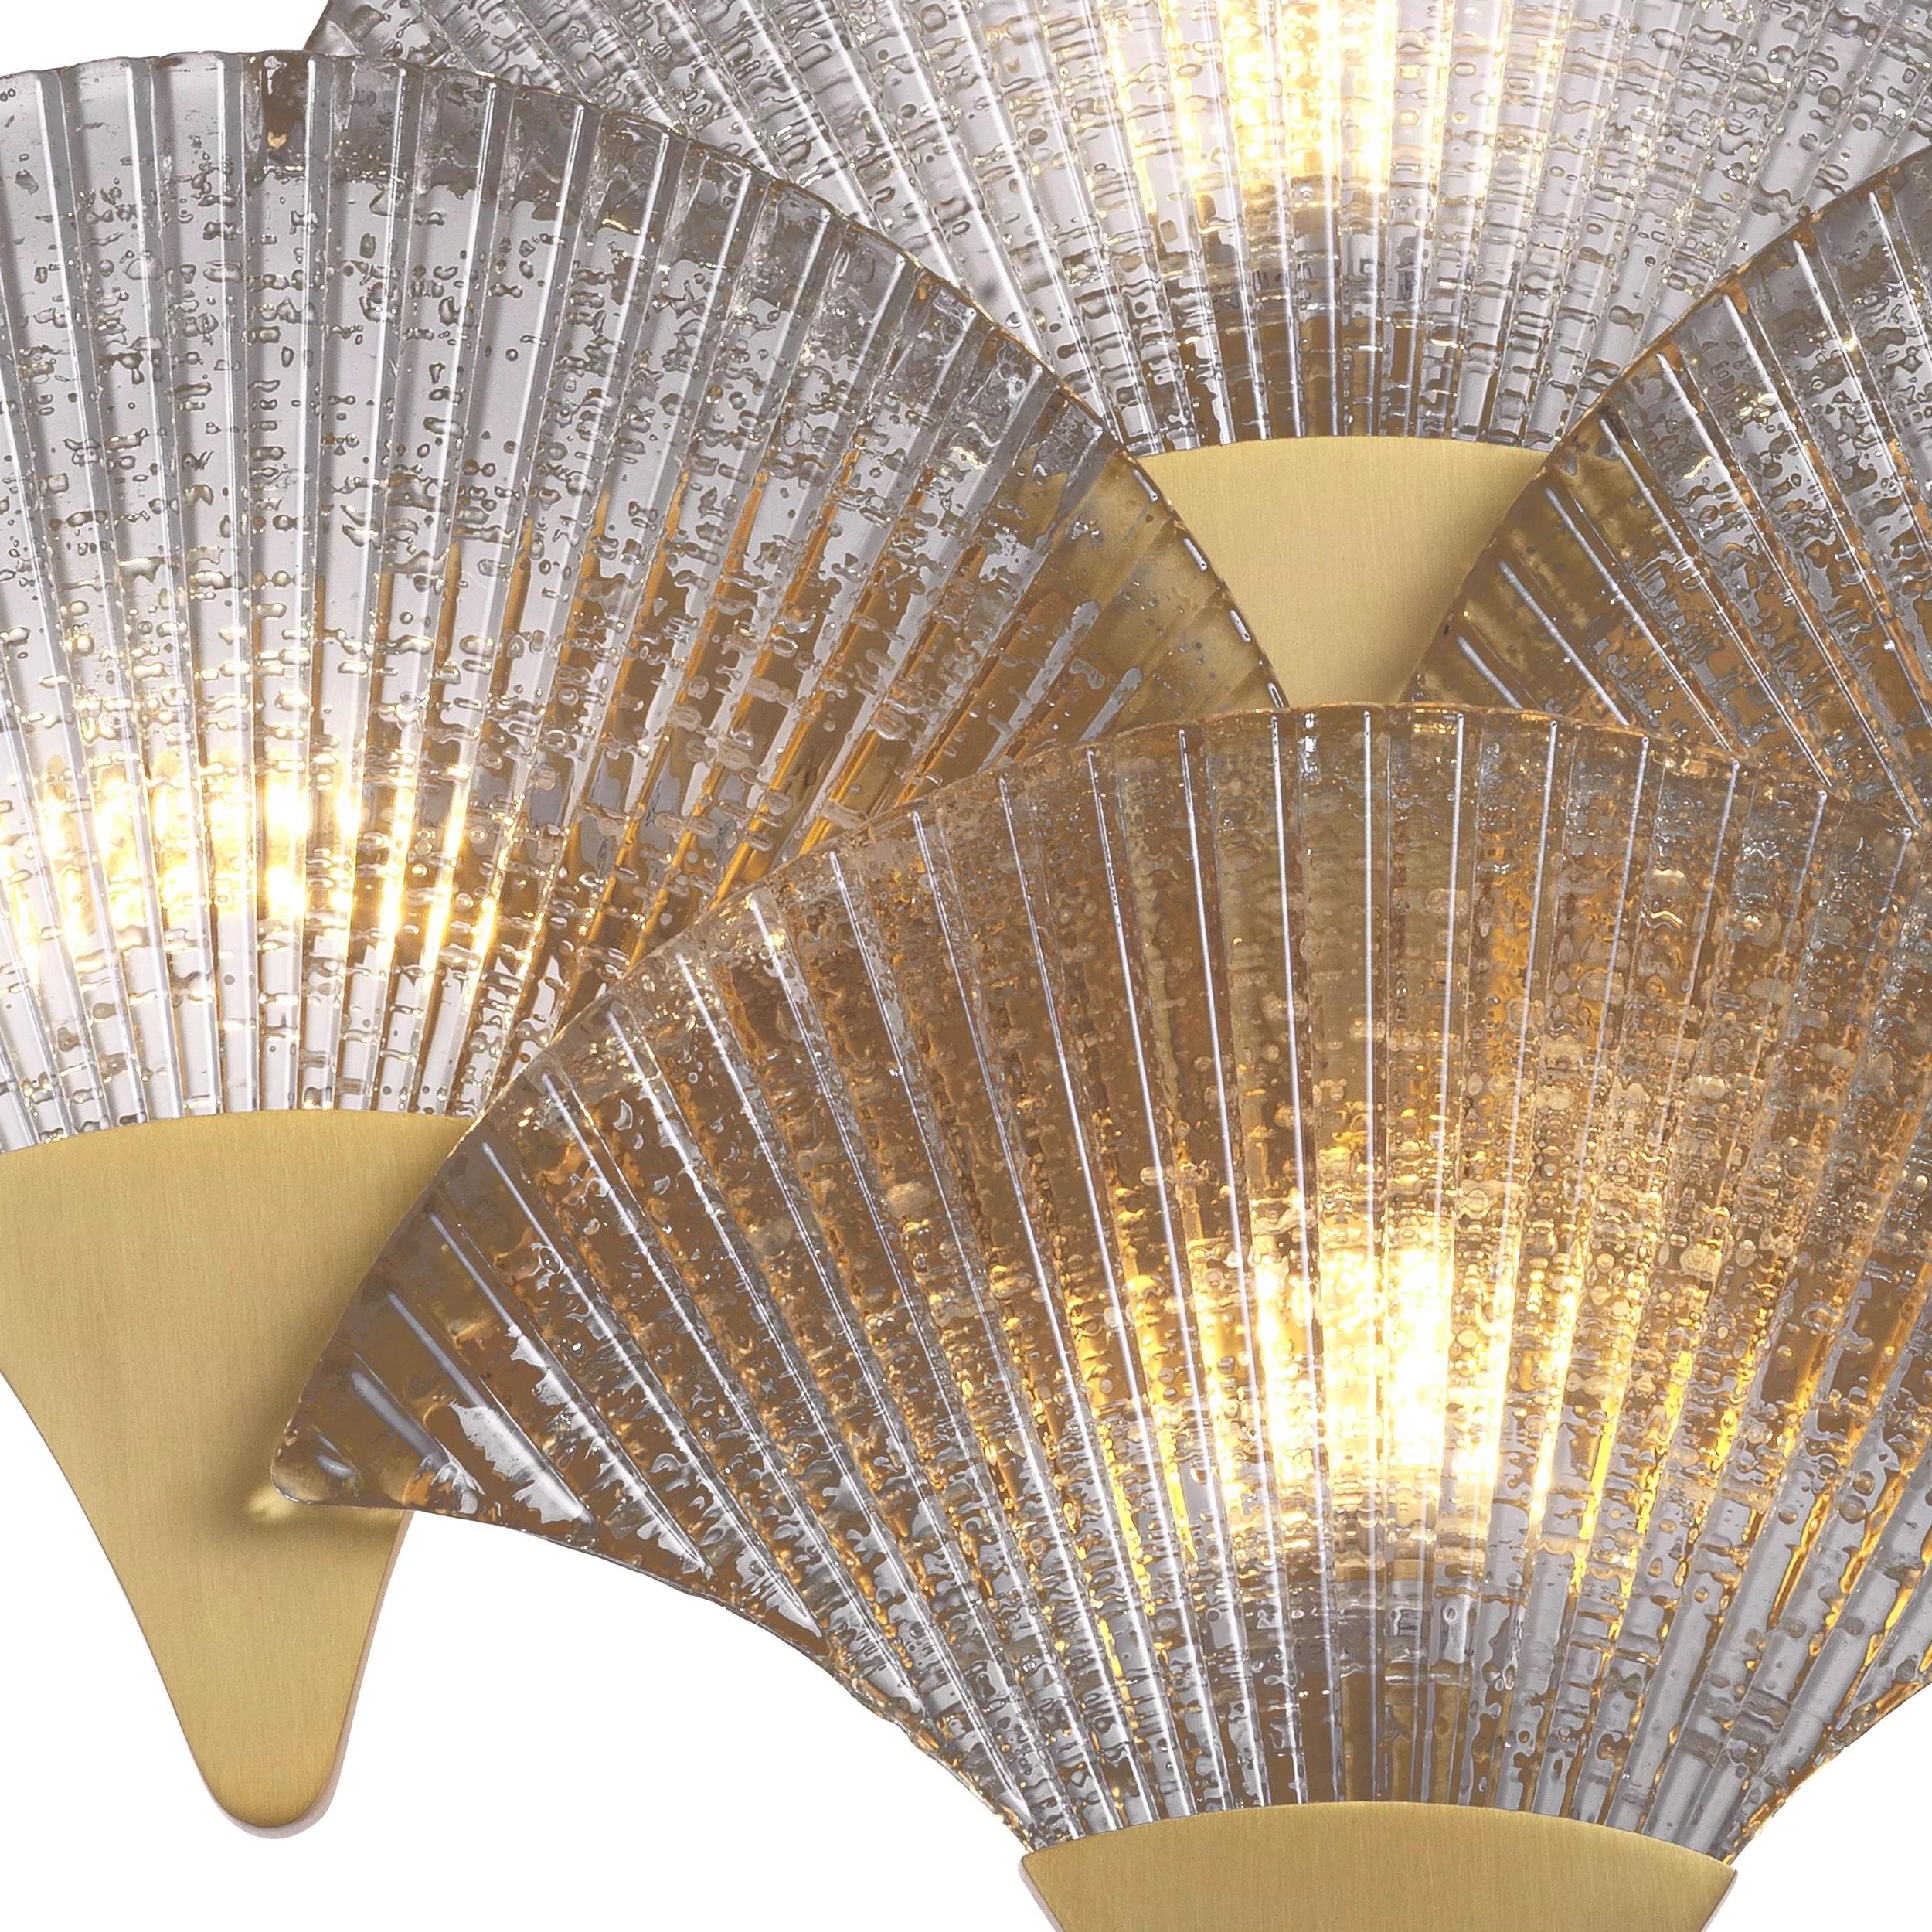 Art Deco style brass and textured glass stylizing palm tree shaped wall light: elegant, presence and class all in transparency. 4 G9 light bulbs required. New item, never used.